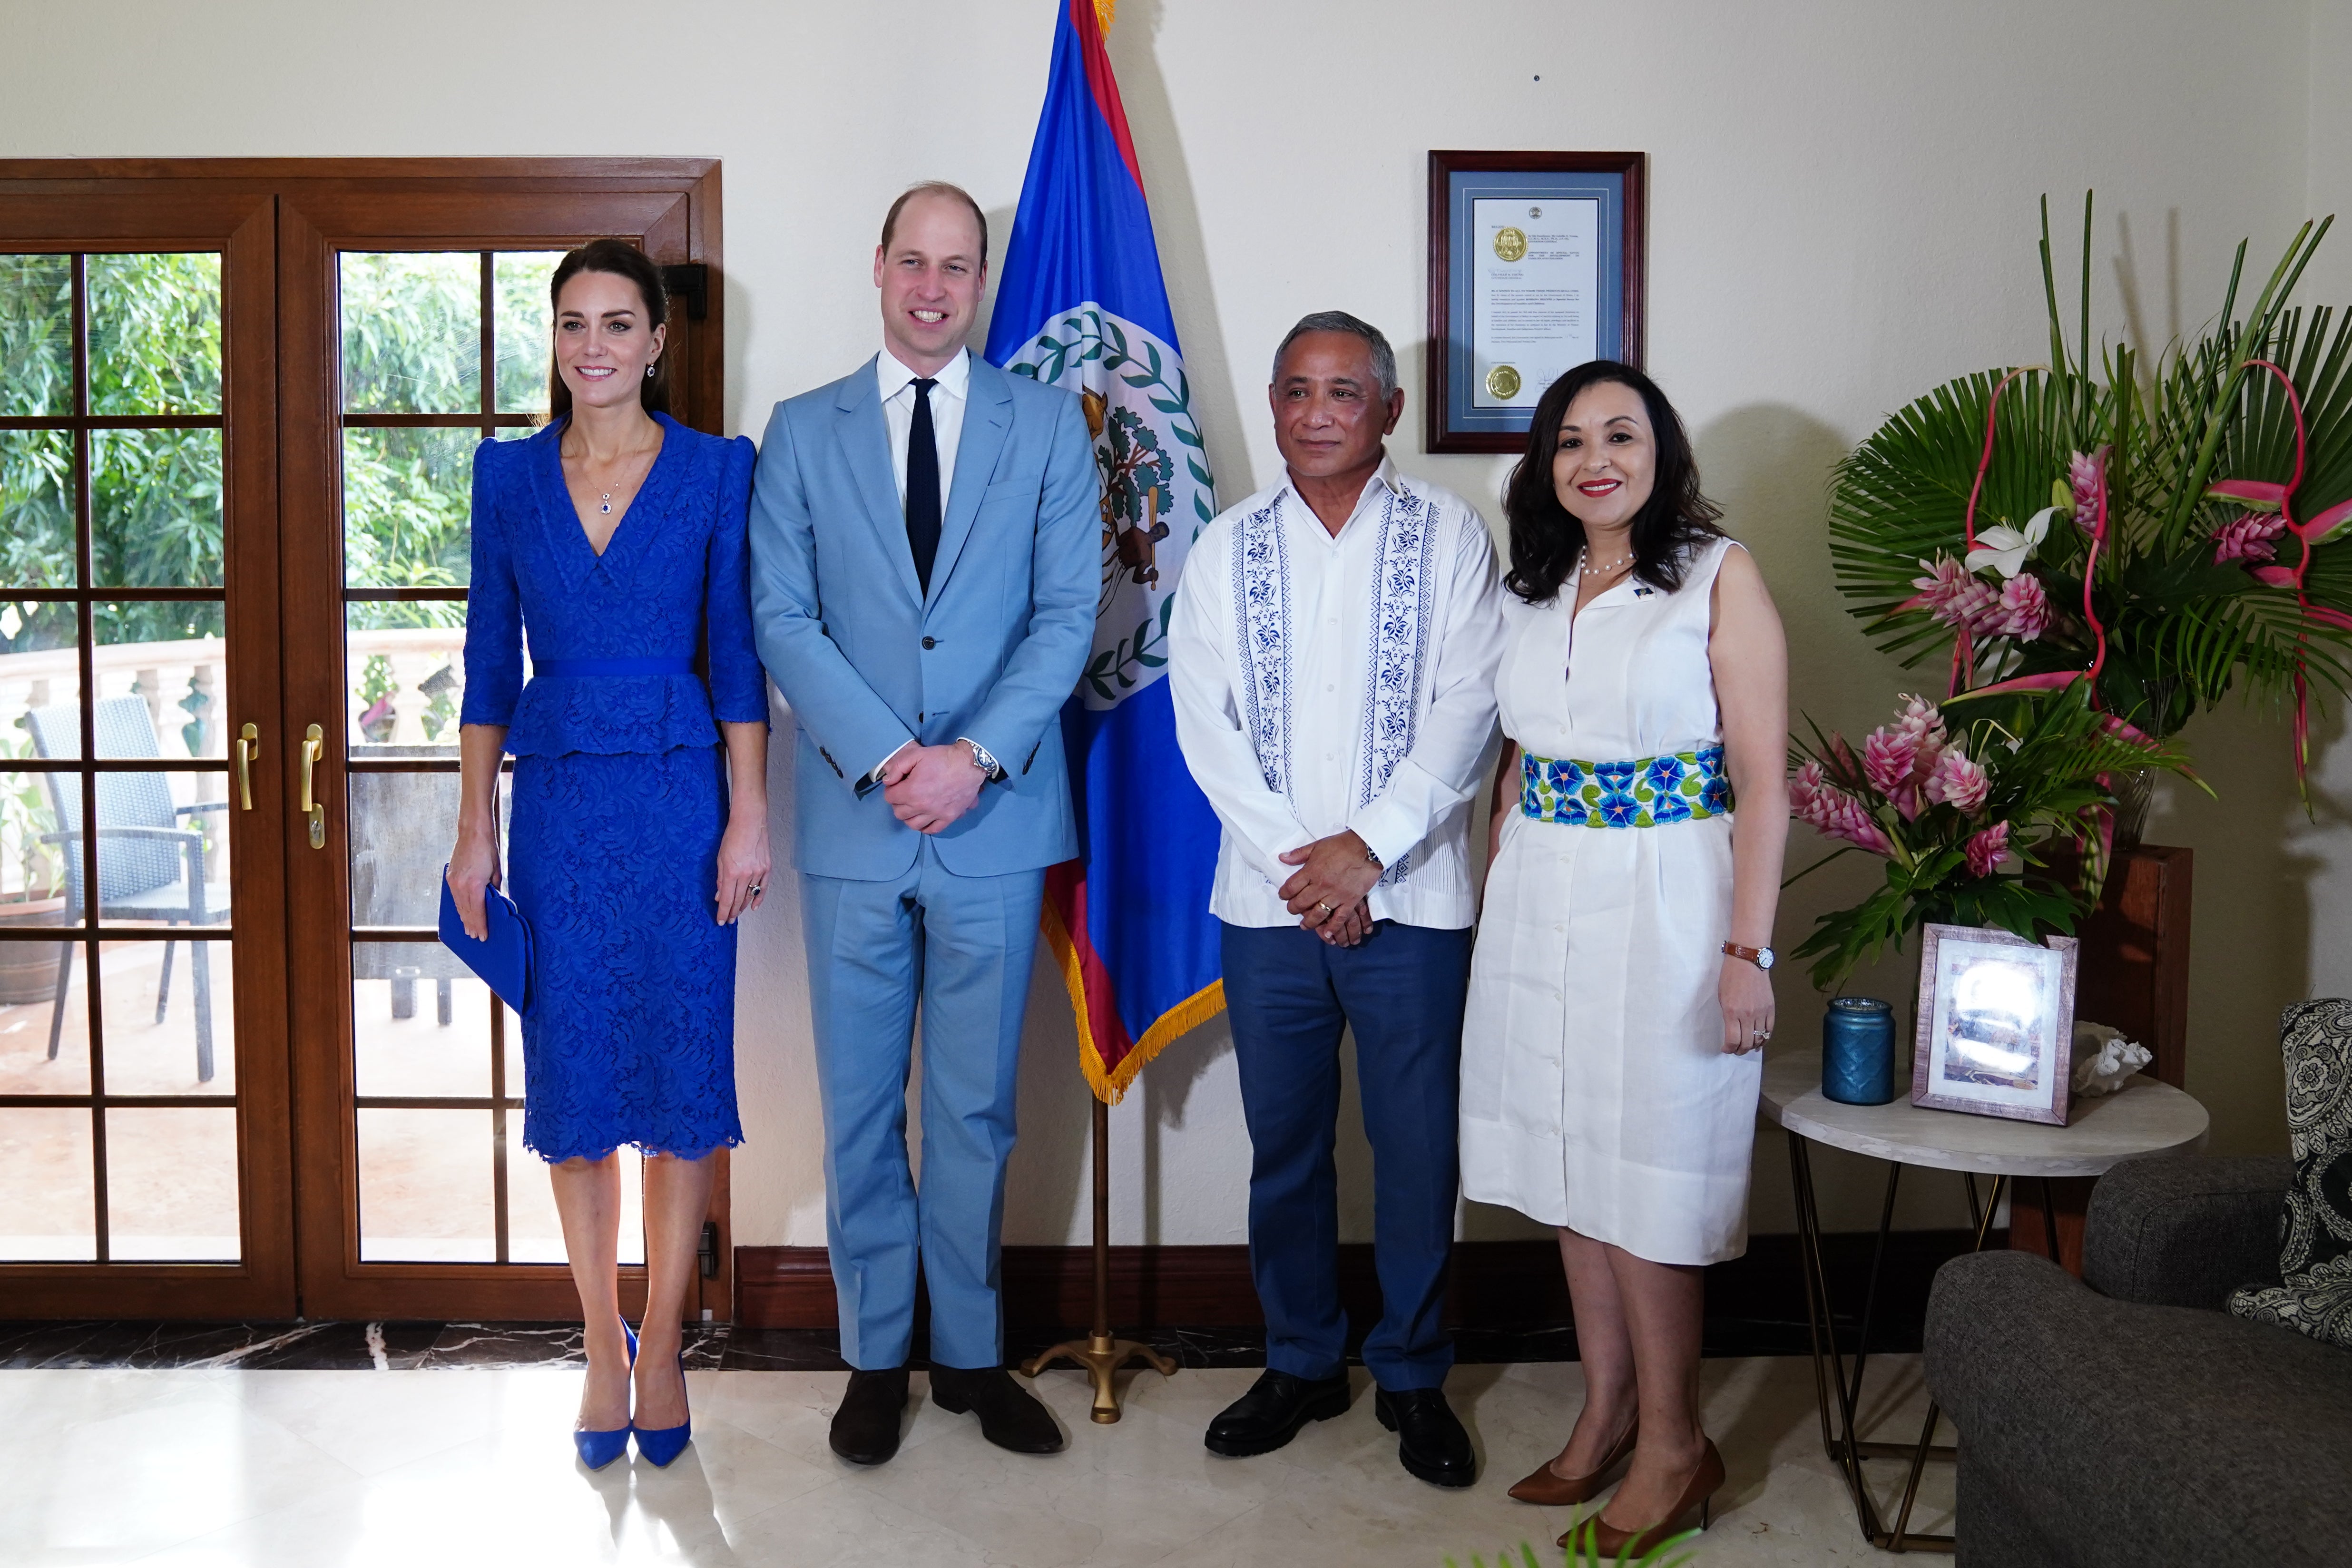 Kate and William meet the prime minister of Belize Johnny Briceno and his wife Rossana Briceno as they begin their tour of the Caribbean